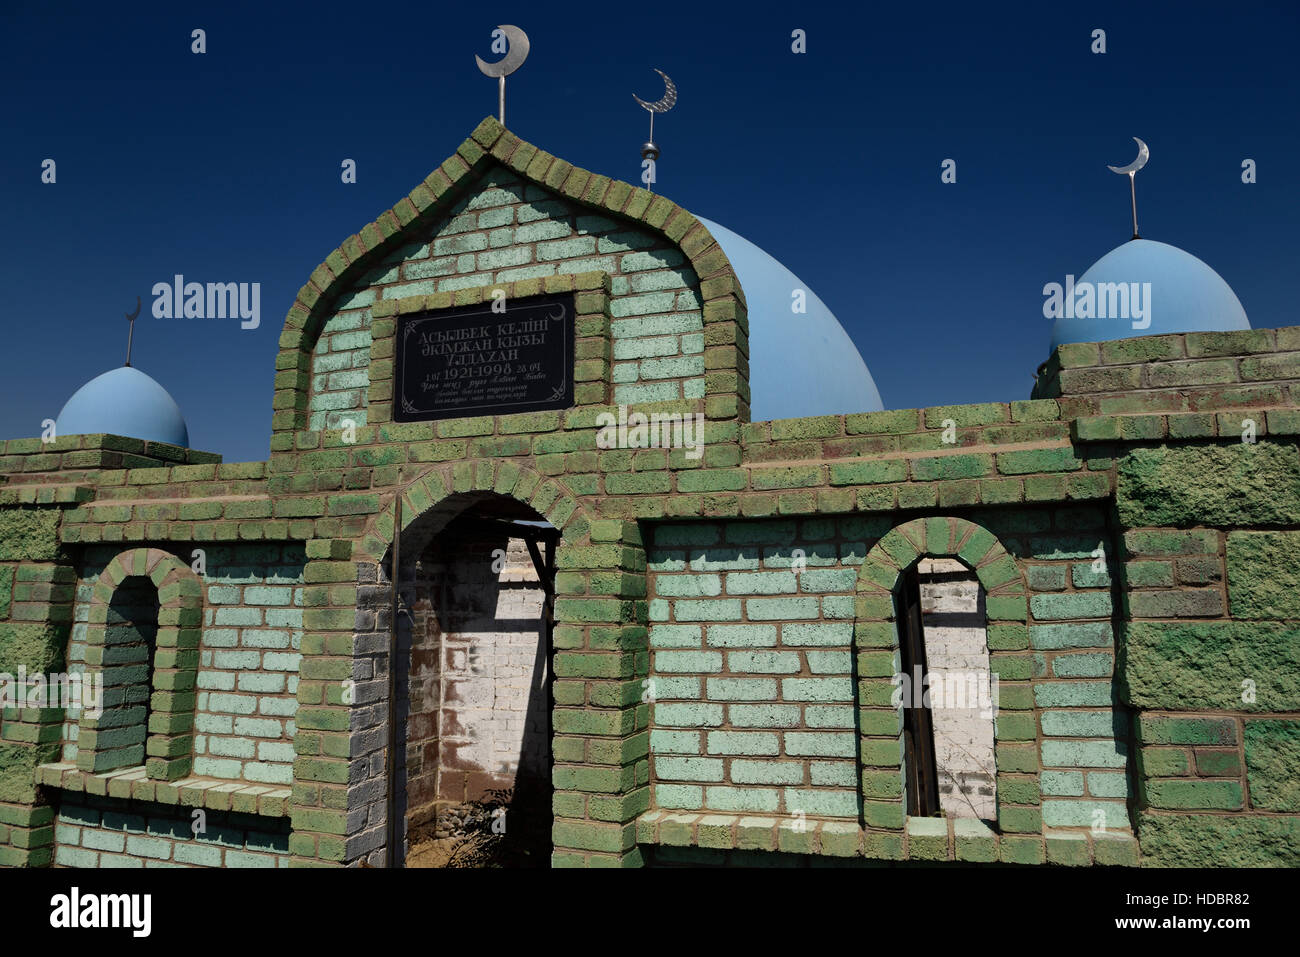 Hilal crescent moon and blue domes on Muslim green brick mausoleums at a cemetery near Shelek Kazakhstan Stock Photo